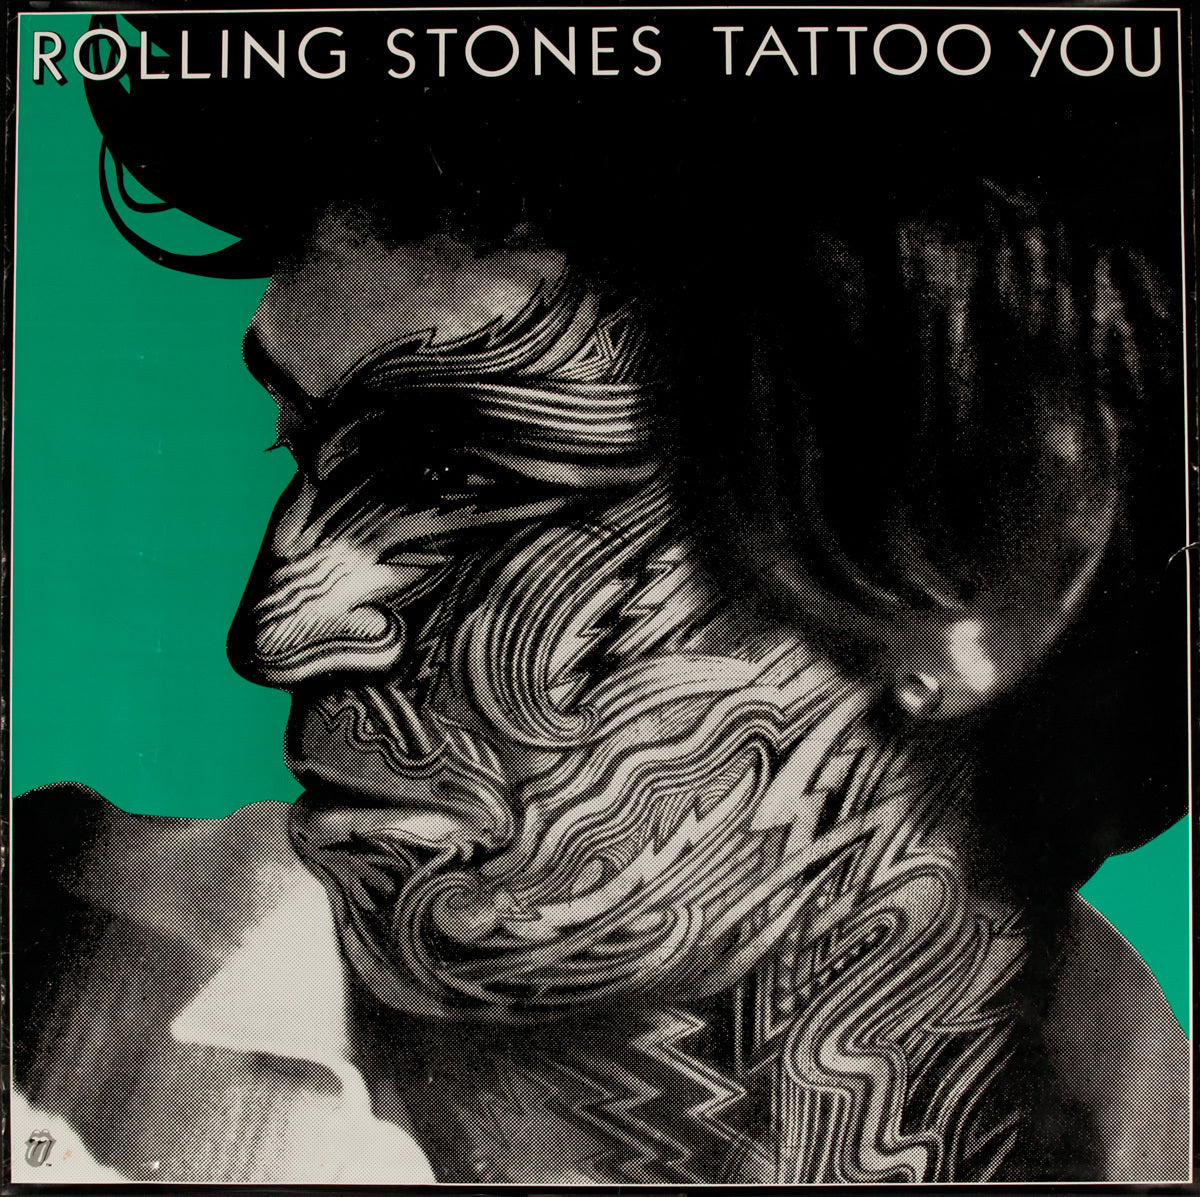 The Rolling Stones Tattoo You (Limited Edition) (Clear Vinyl) (Alt. Cover) (2 Lp's) | Vinyl